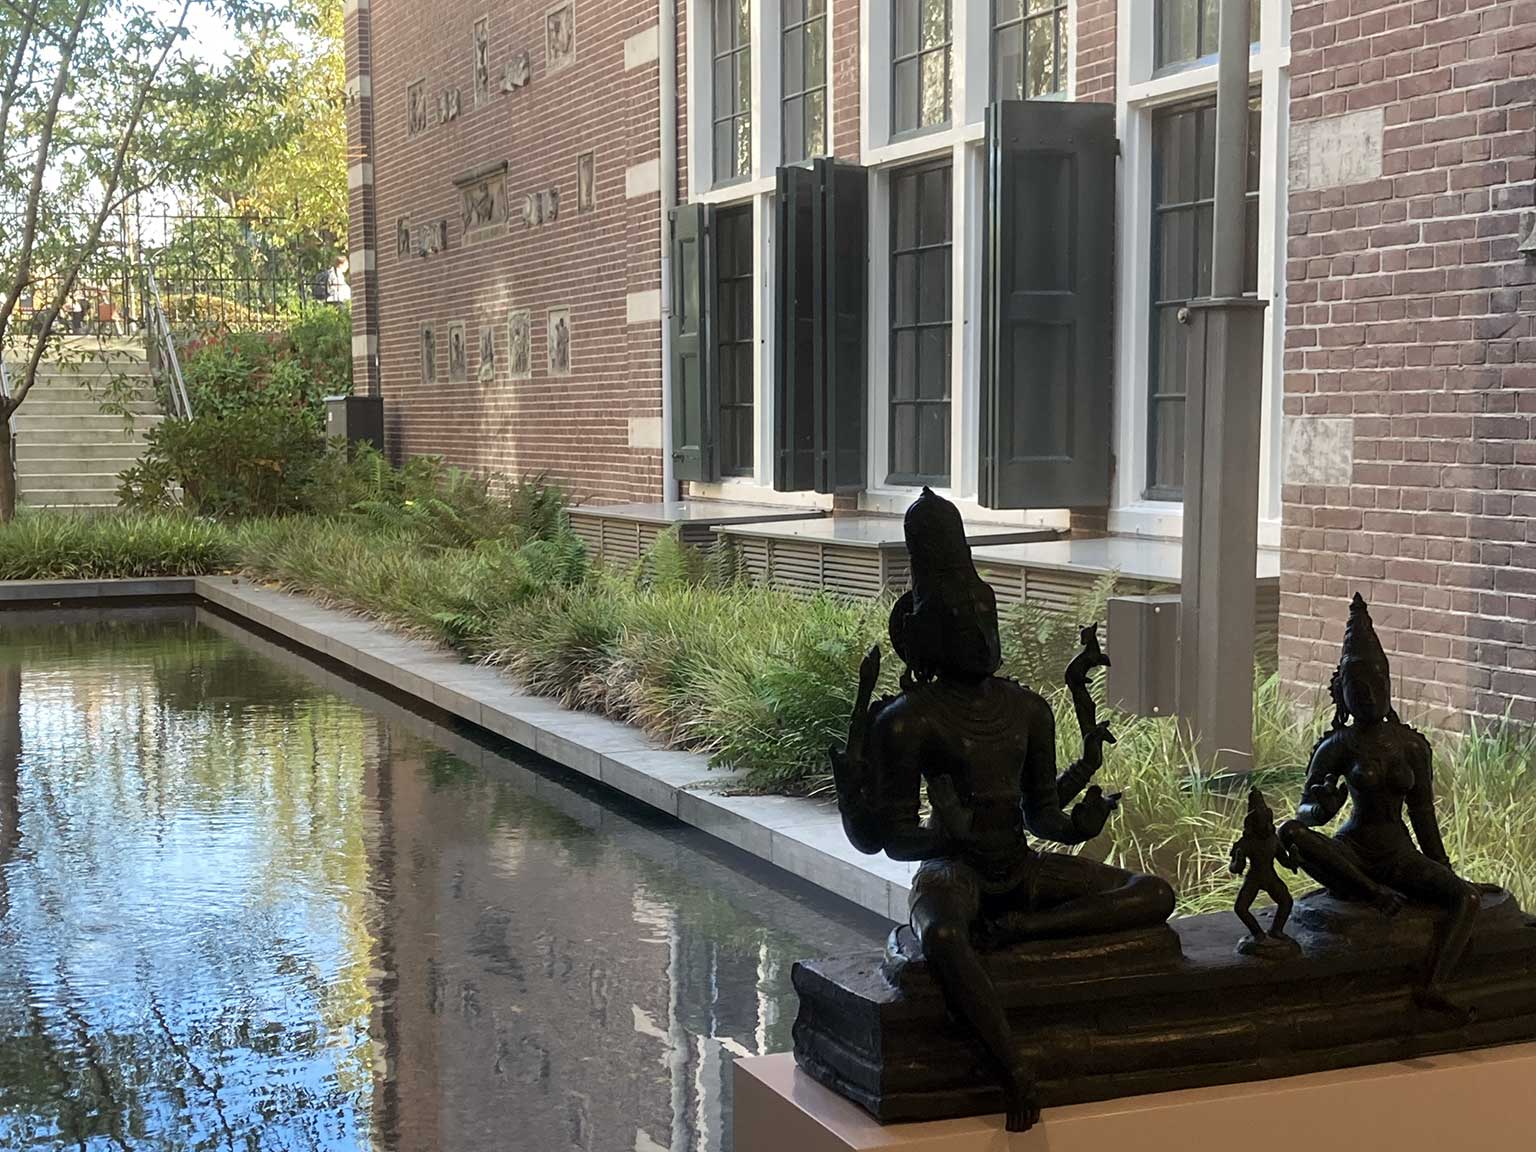 View of the pond and Fragments building of the Rijksmuseum, Amsterdam, from the Asian pavilion